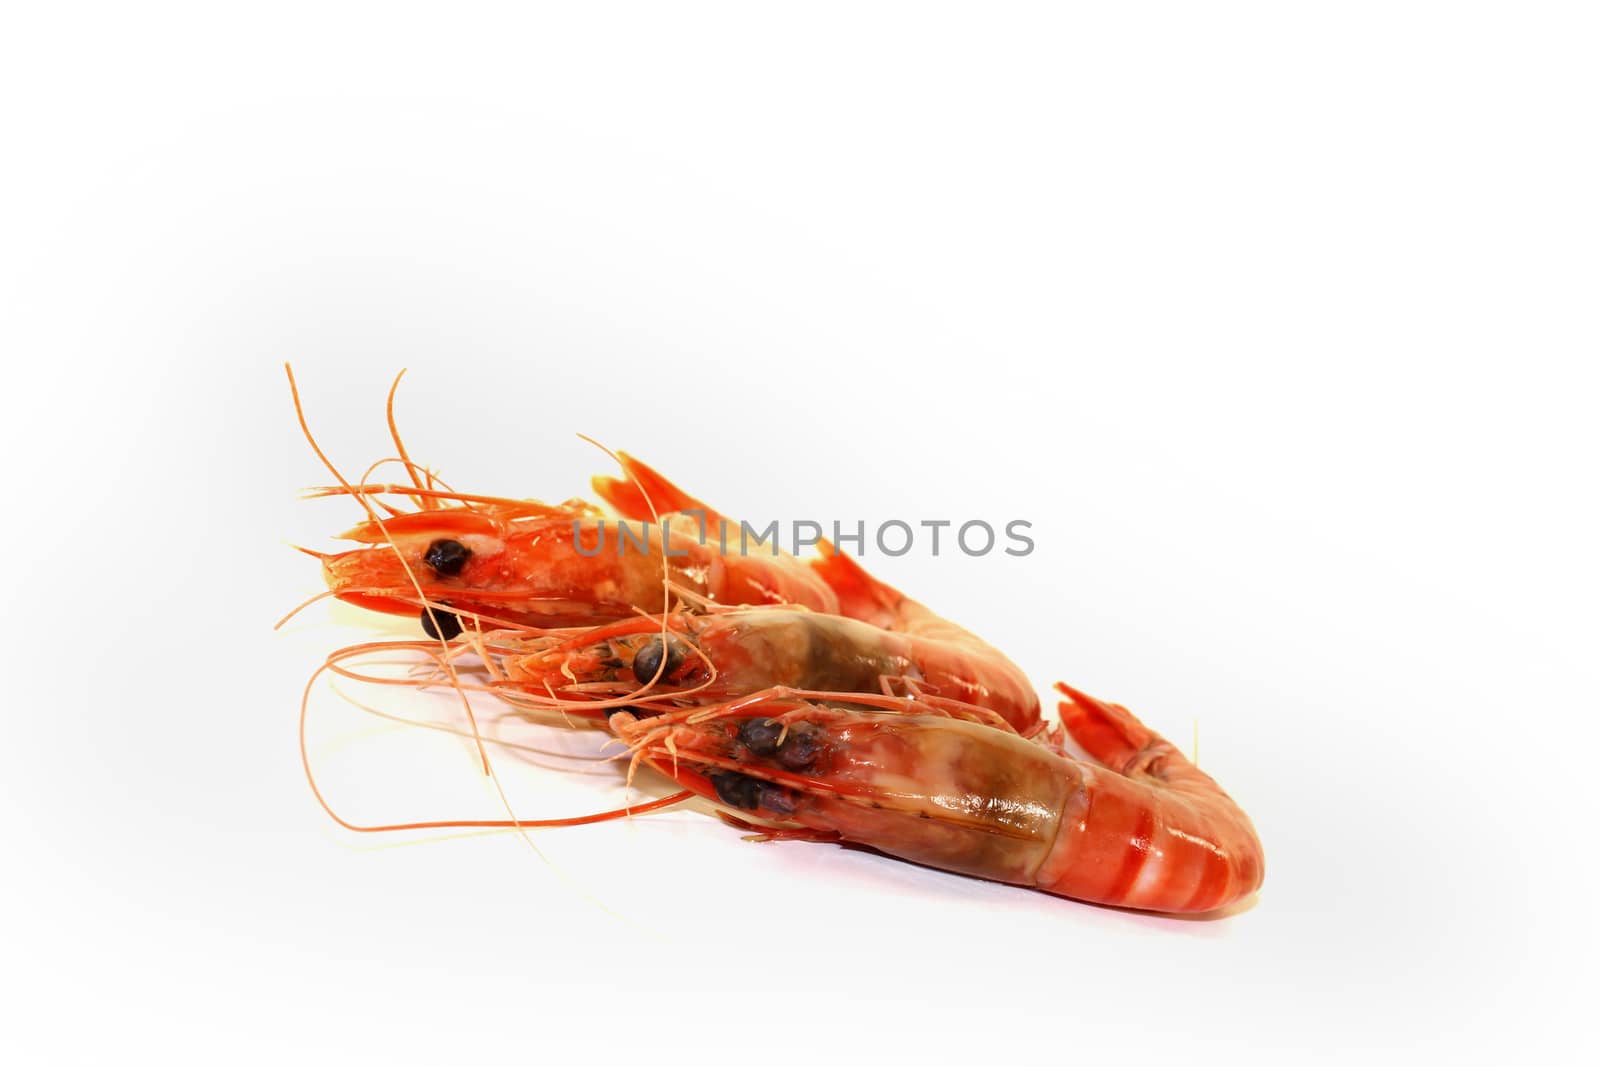 three fresh cooked prawns on a light background